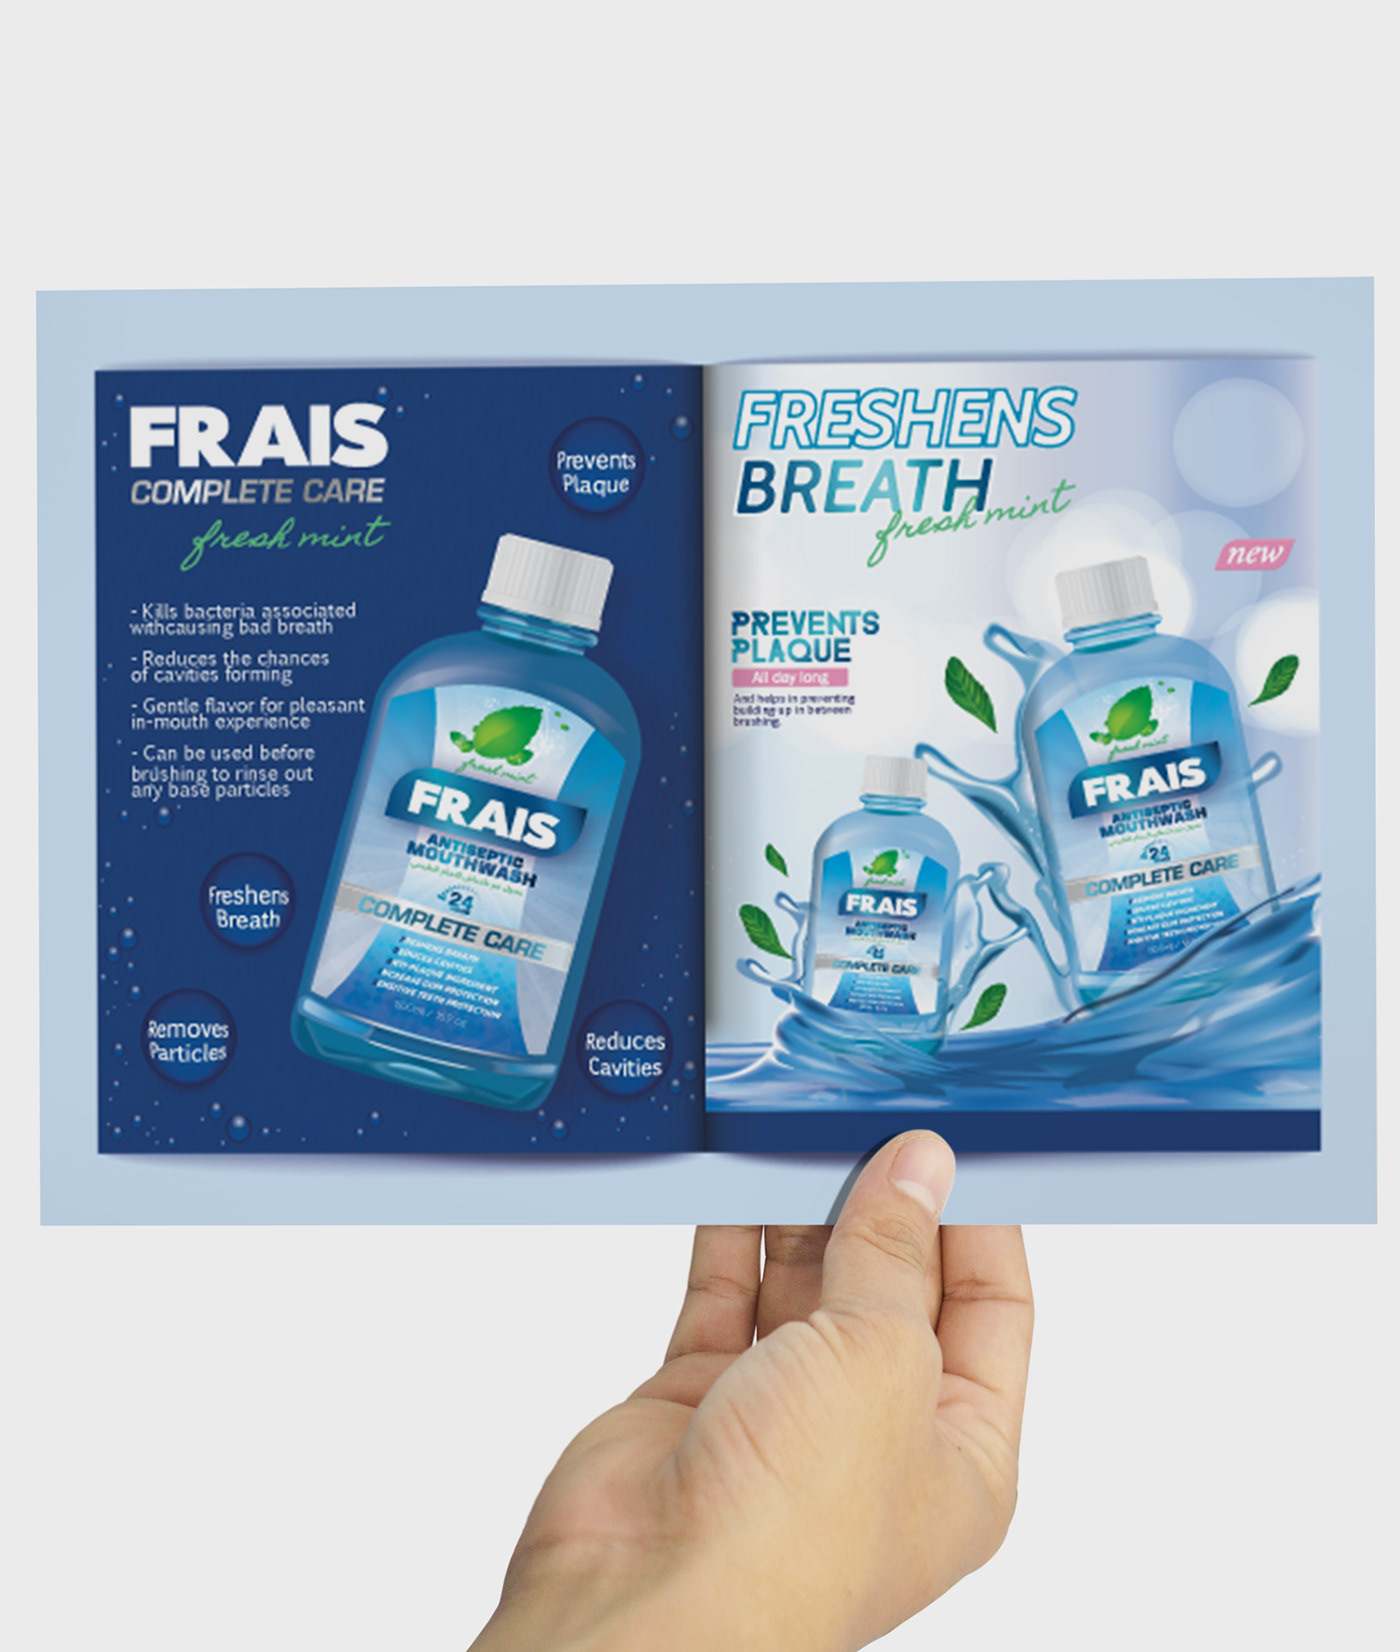 Health healthcare Packaging design Mouthwash toothpaste Advertising  graphic medical fresh